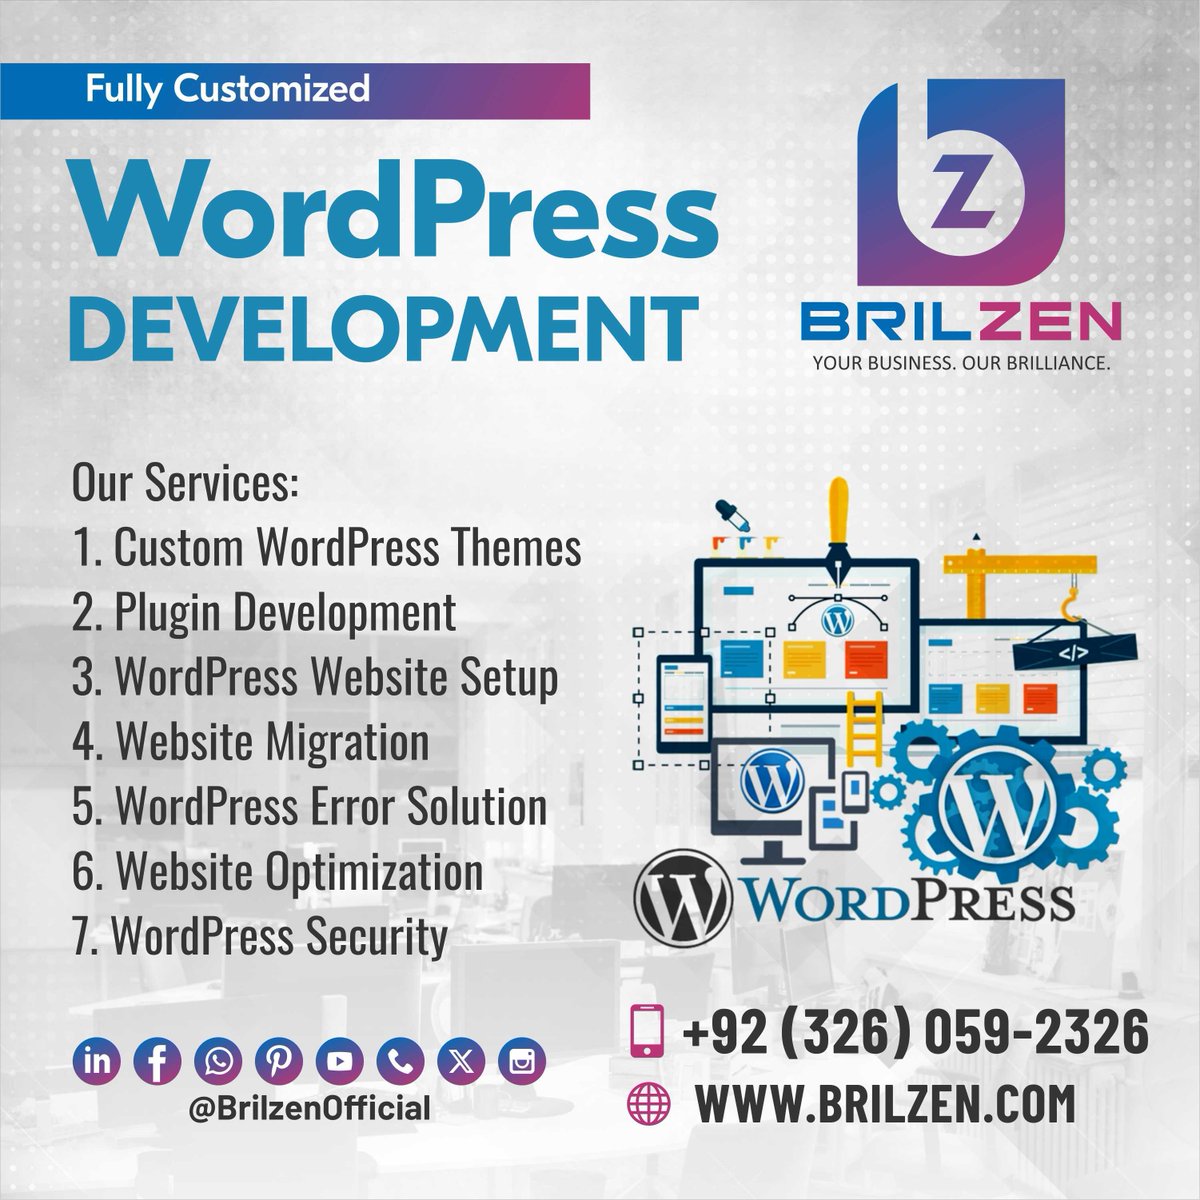 Say goodbye to dull websites, and hello to a stunning online presence that leaves a lasting impact!
Transform your website today!
Visit brilzen.com for more details

#WebDesign #SocialMediaMarketing #SEO    #DigitalStrategy #WordPressDevelopment #WebsiteDesign